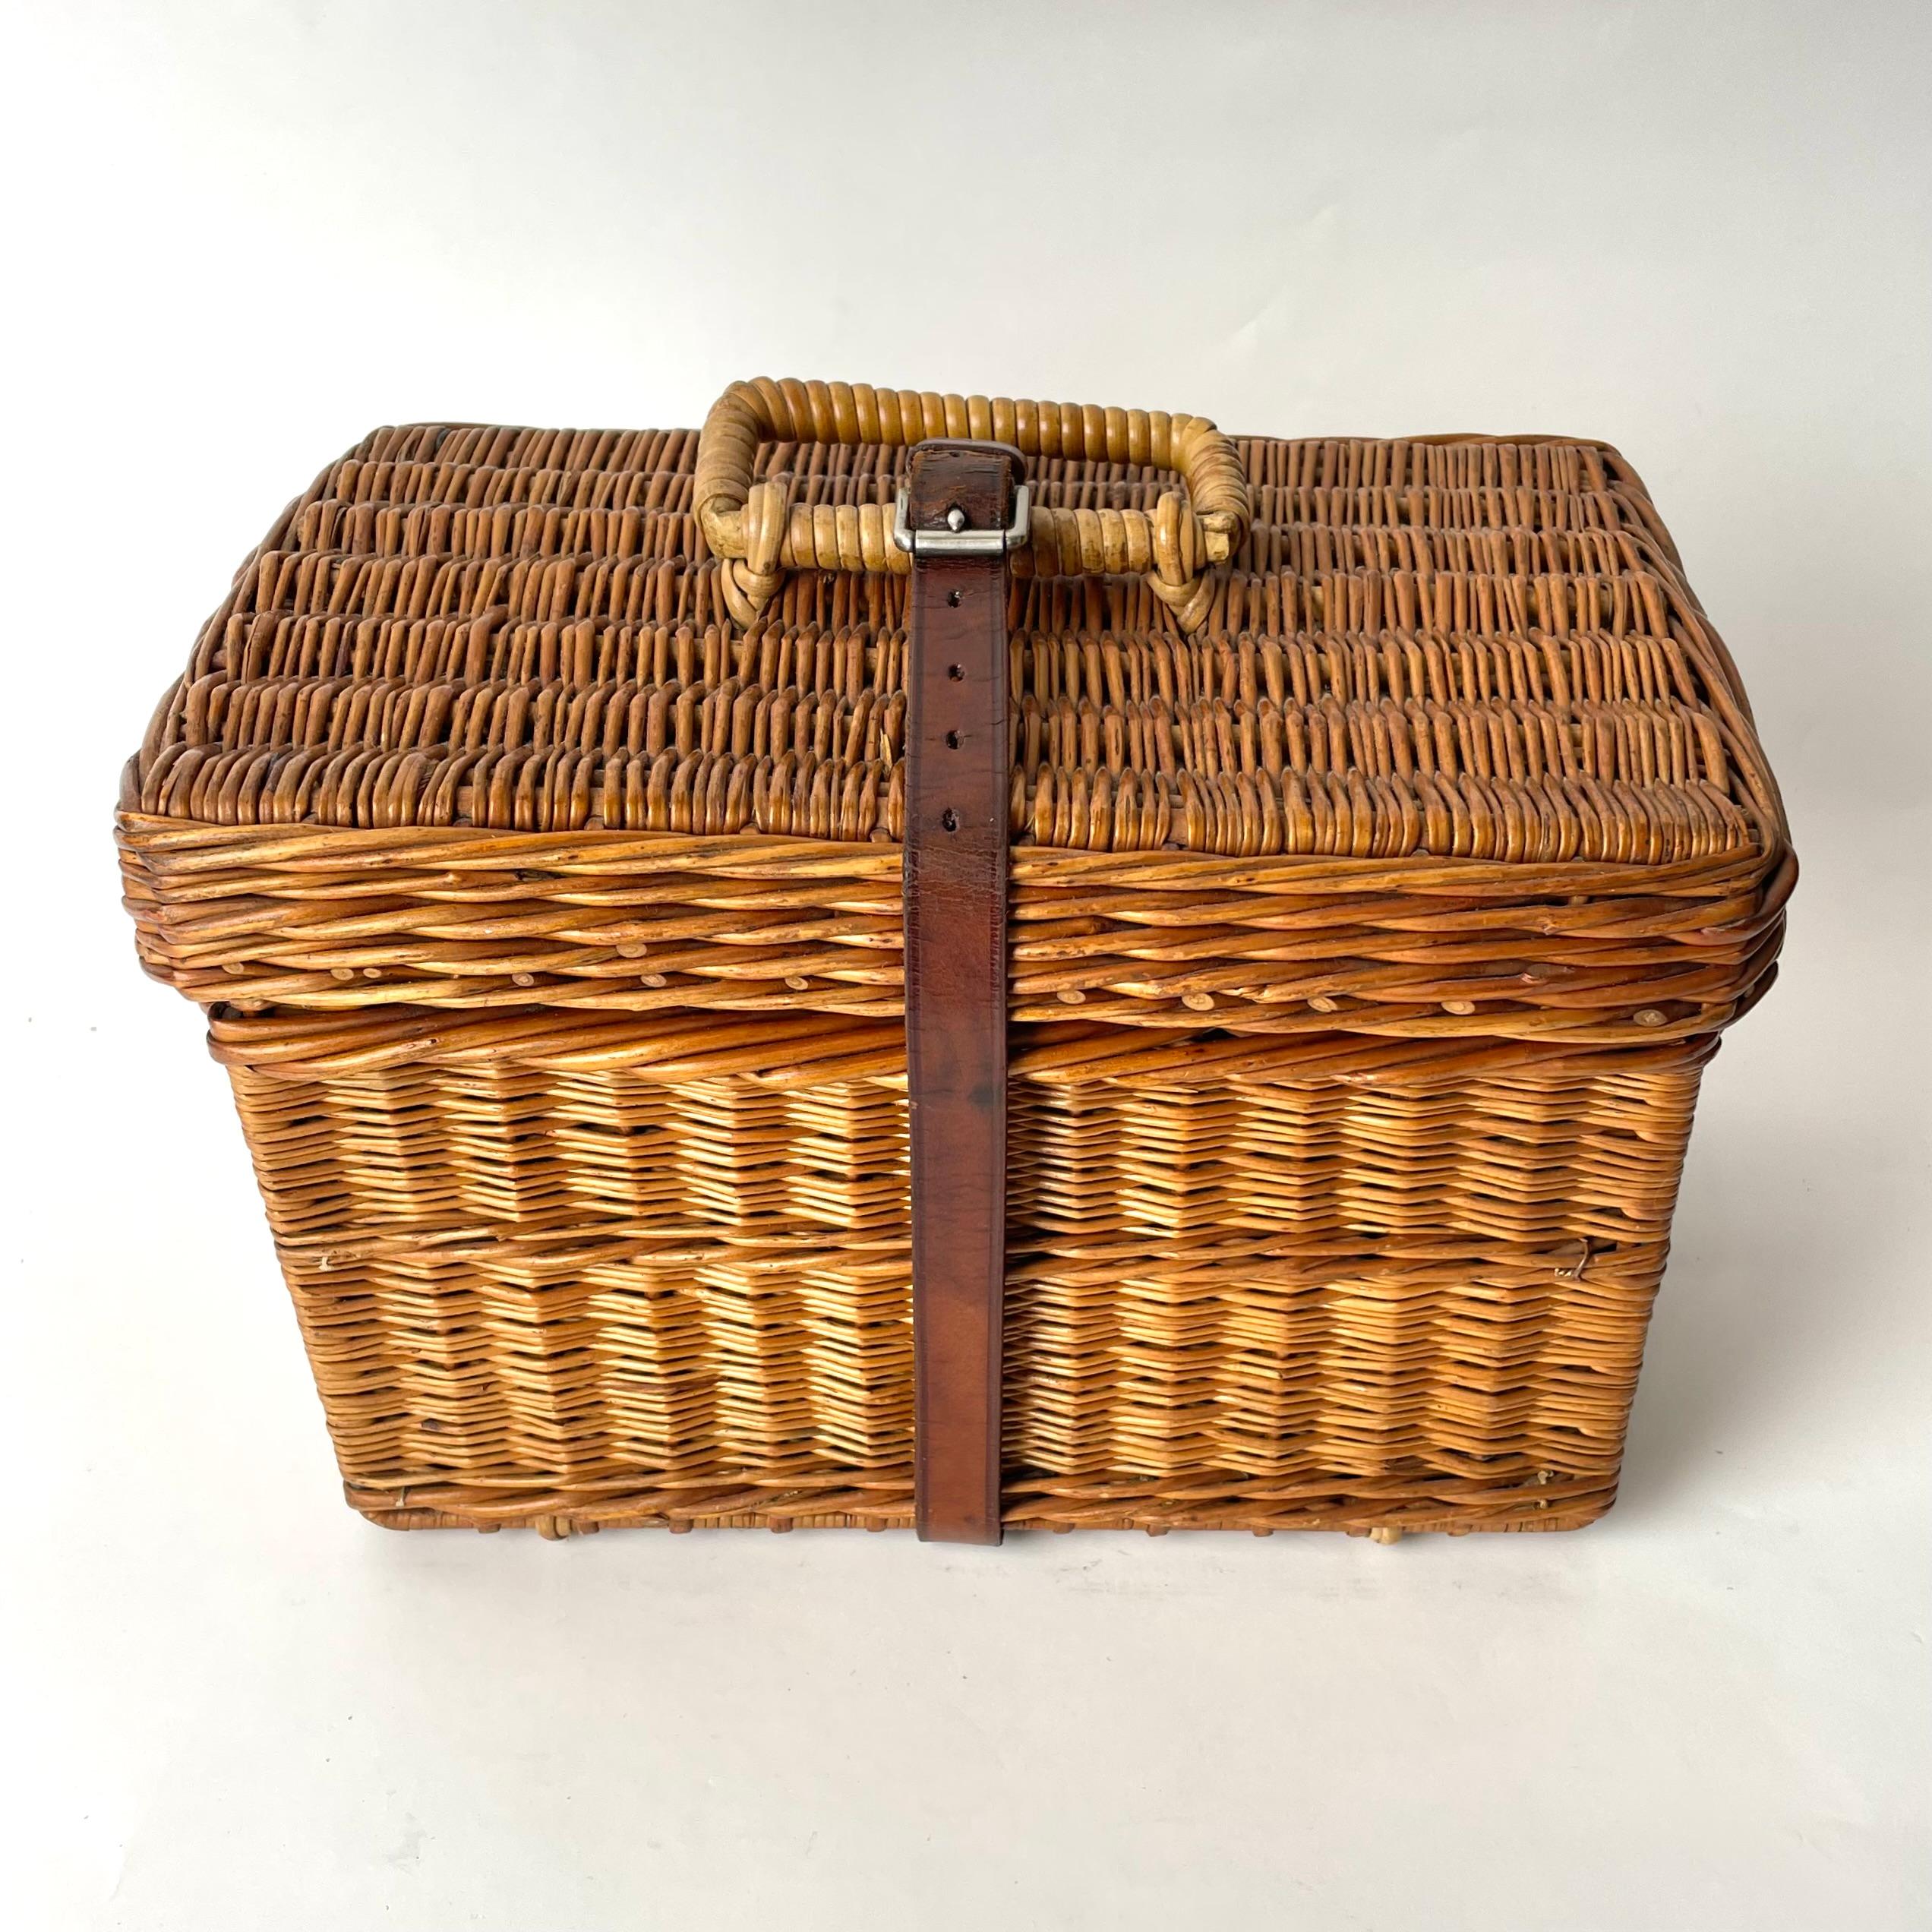 Picnic Basket, Rattan with Tinplate & Porcelain Interiors Late 19th/Early 20th C In Good Condition For Sale In Knivsta, SE